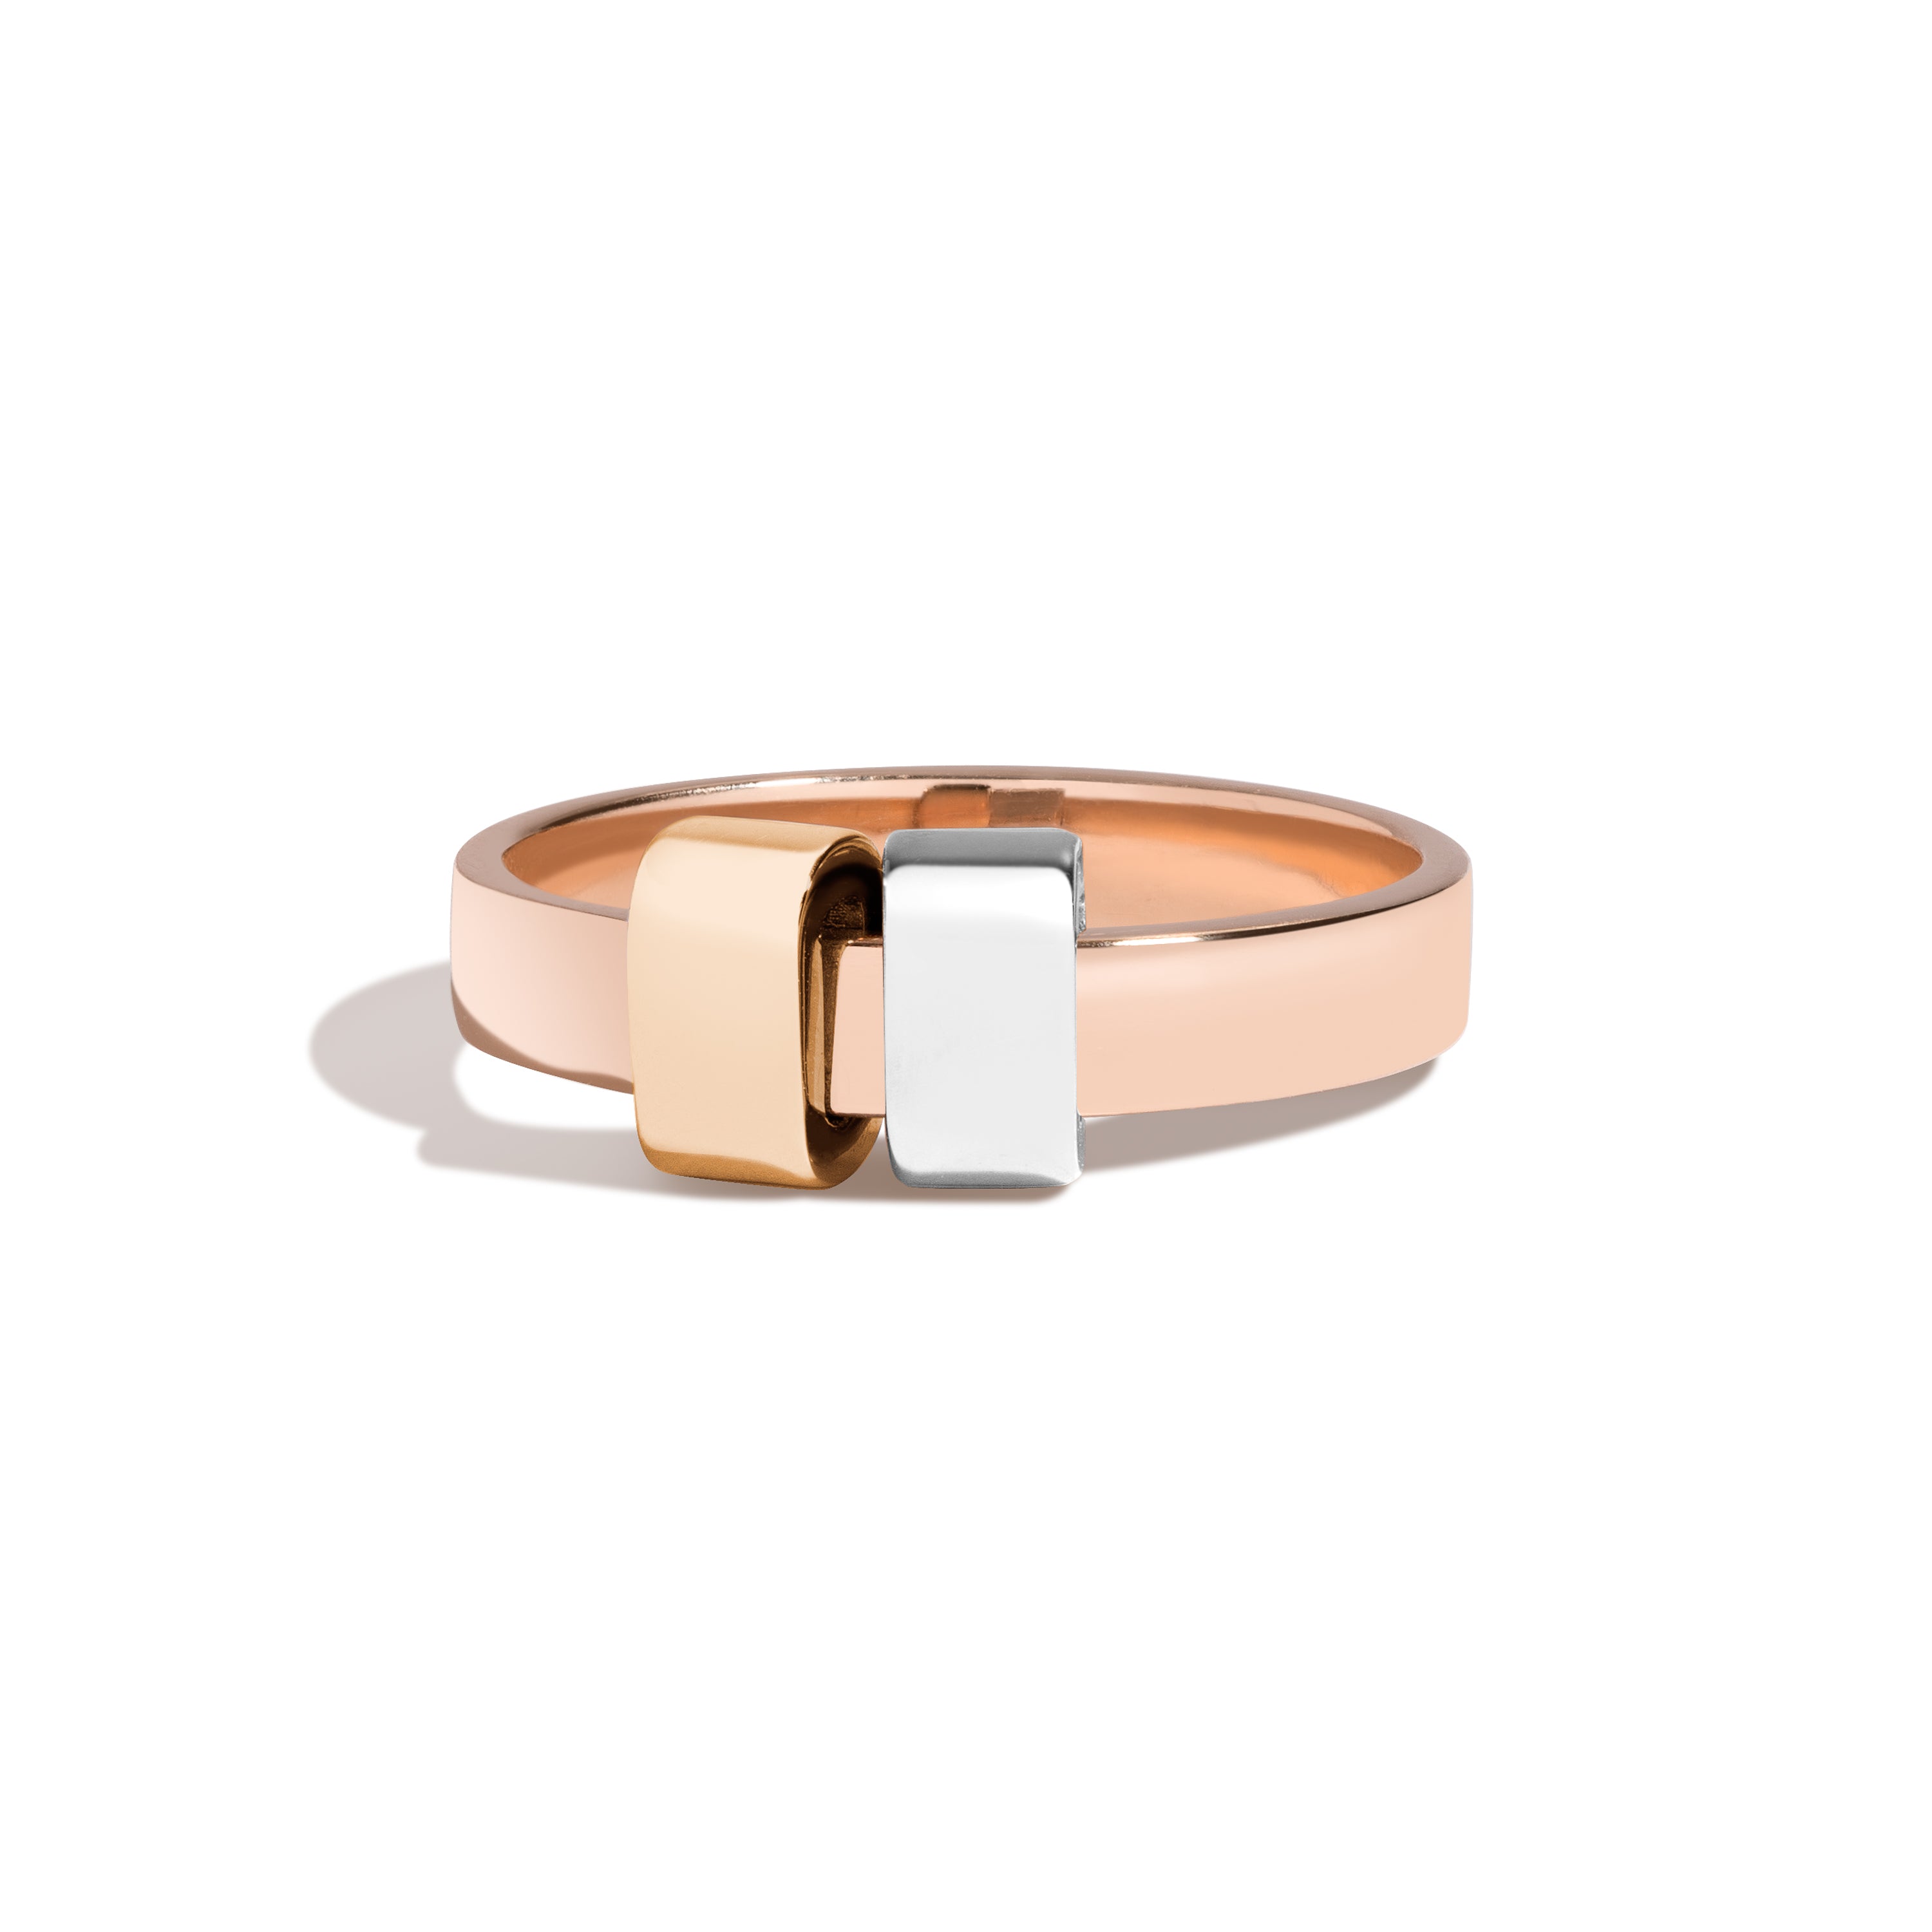 Shahla Karimi Joon Signature 4mm 14K Rose Gold Band With 2 14K Yellow Gold and Platinum Wraps